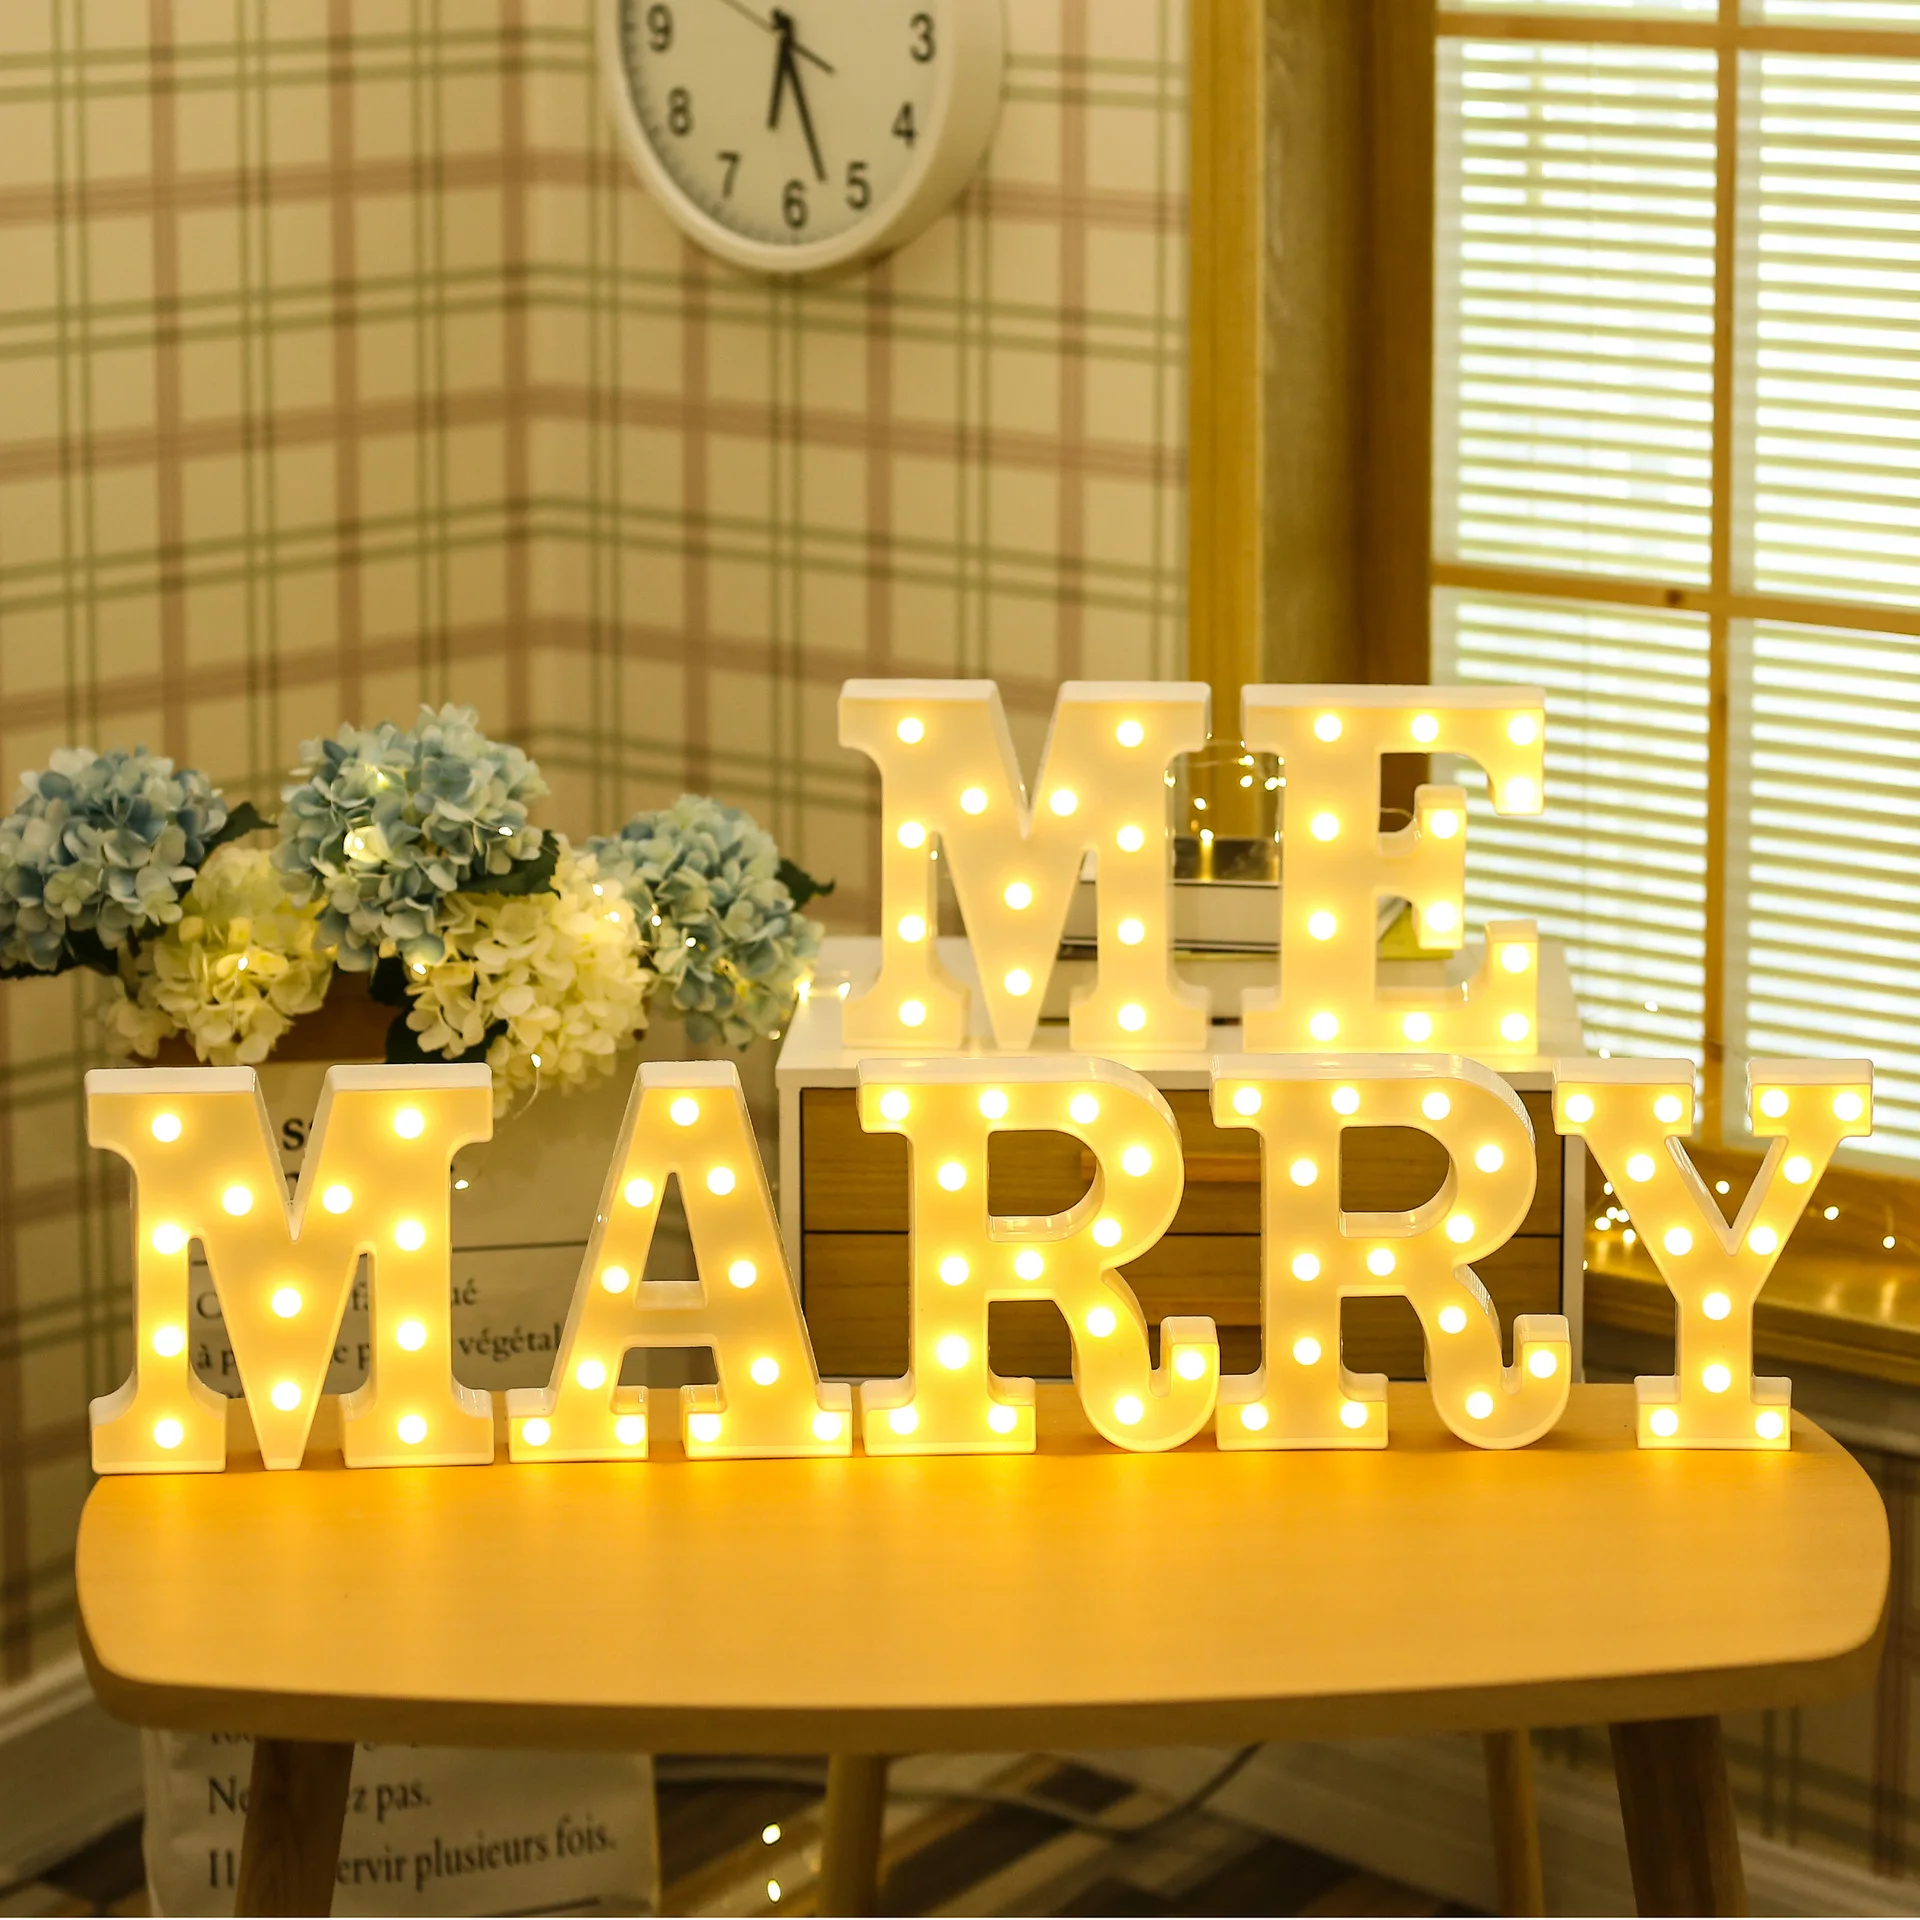 JAROWN 22cm LED Letter Light Wedding Party Birthday Christmas Decor Home Wall Decor Proposal Decorative Valentine's Day Gift